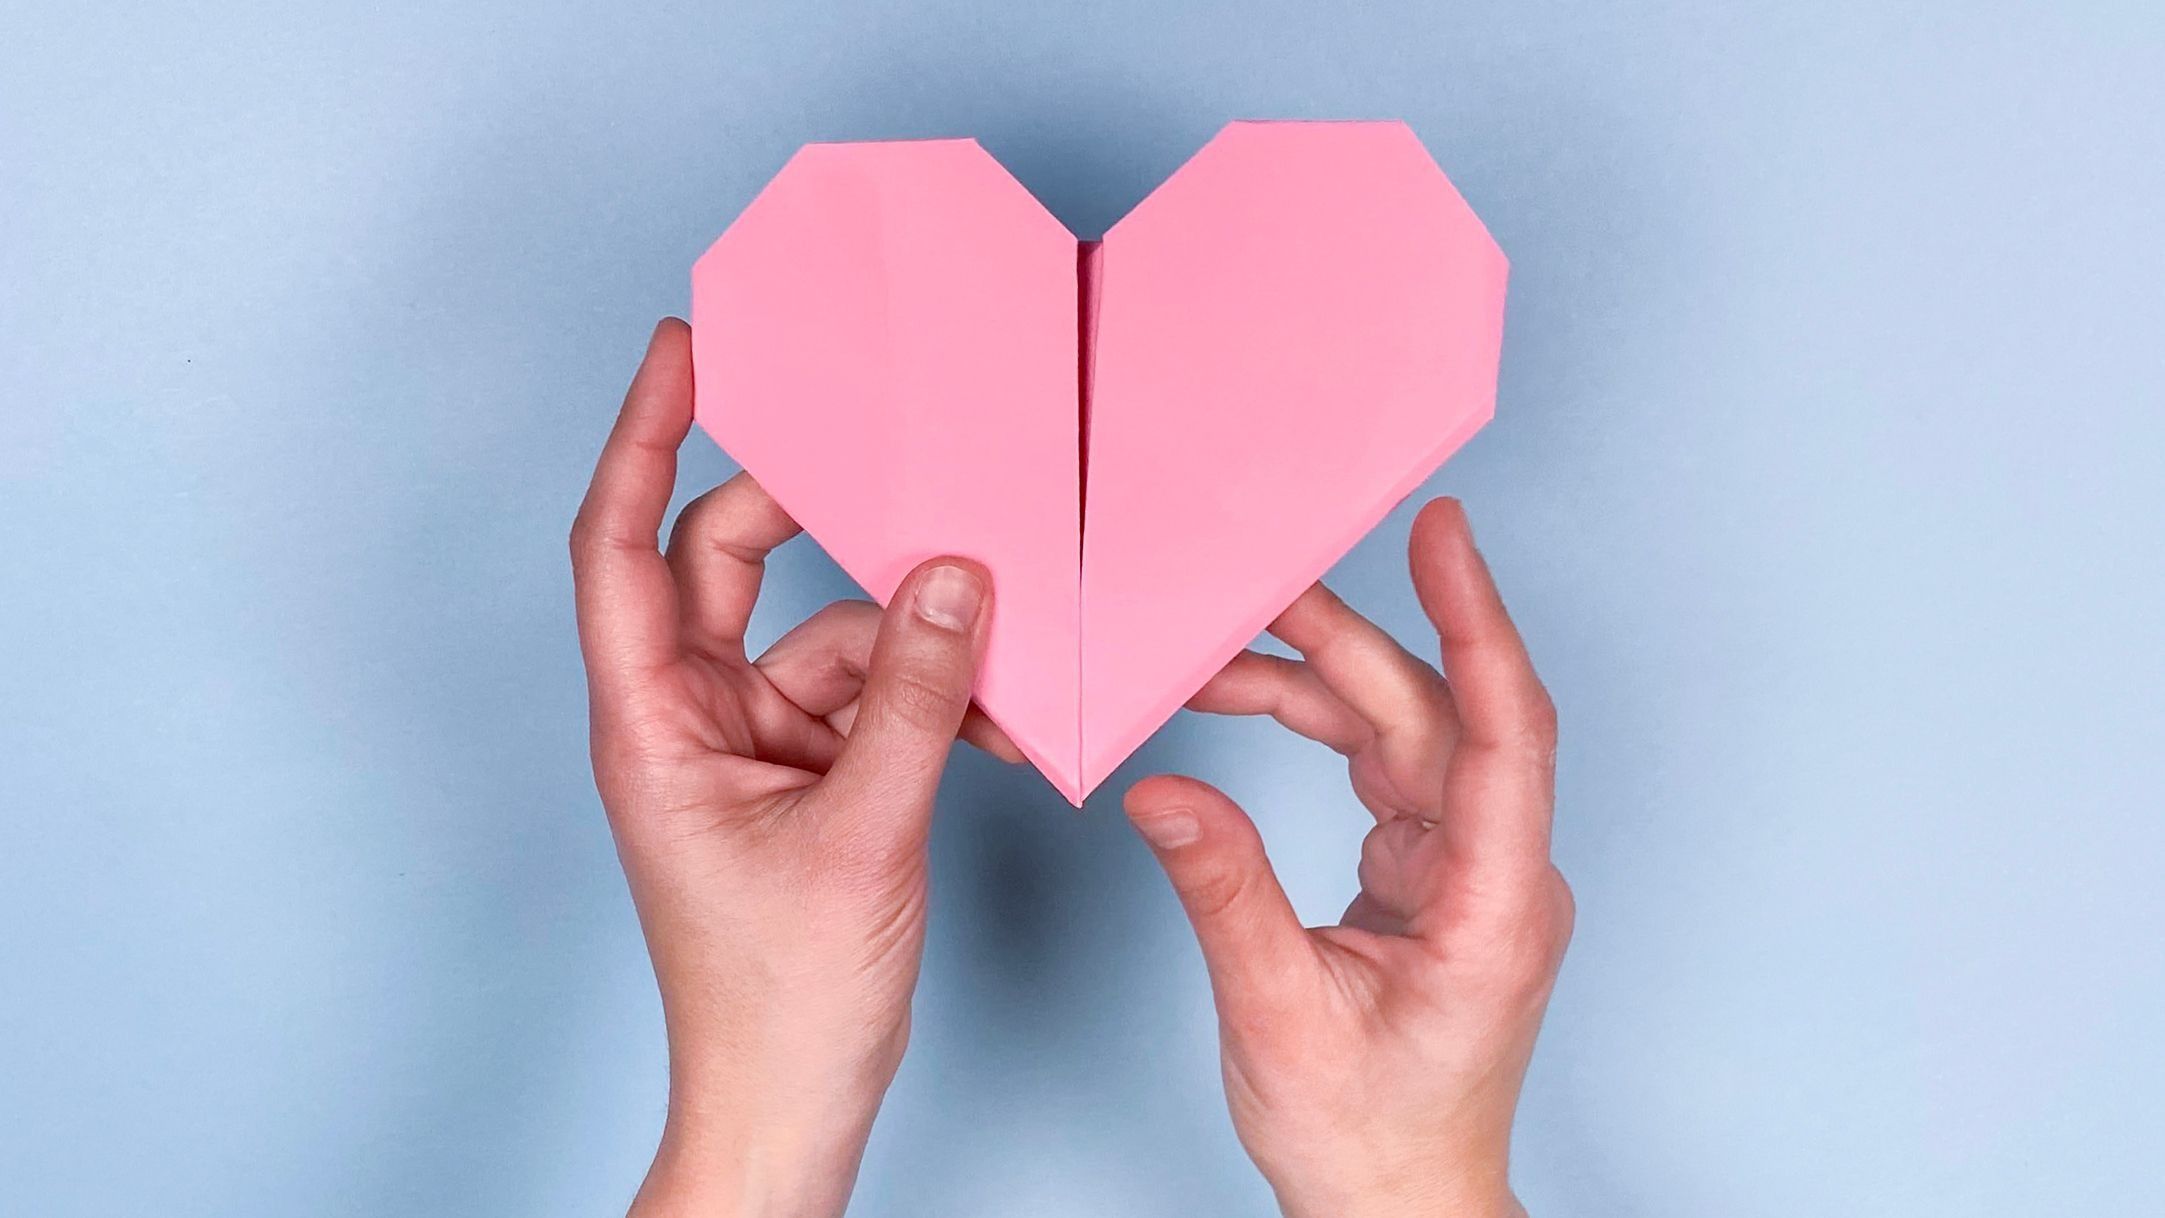 How to Fold a Paper Heart - Making an Origami Heart